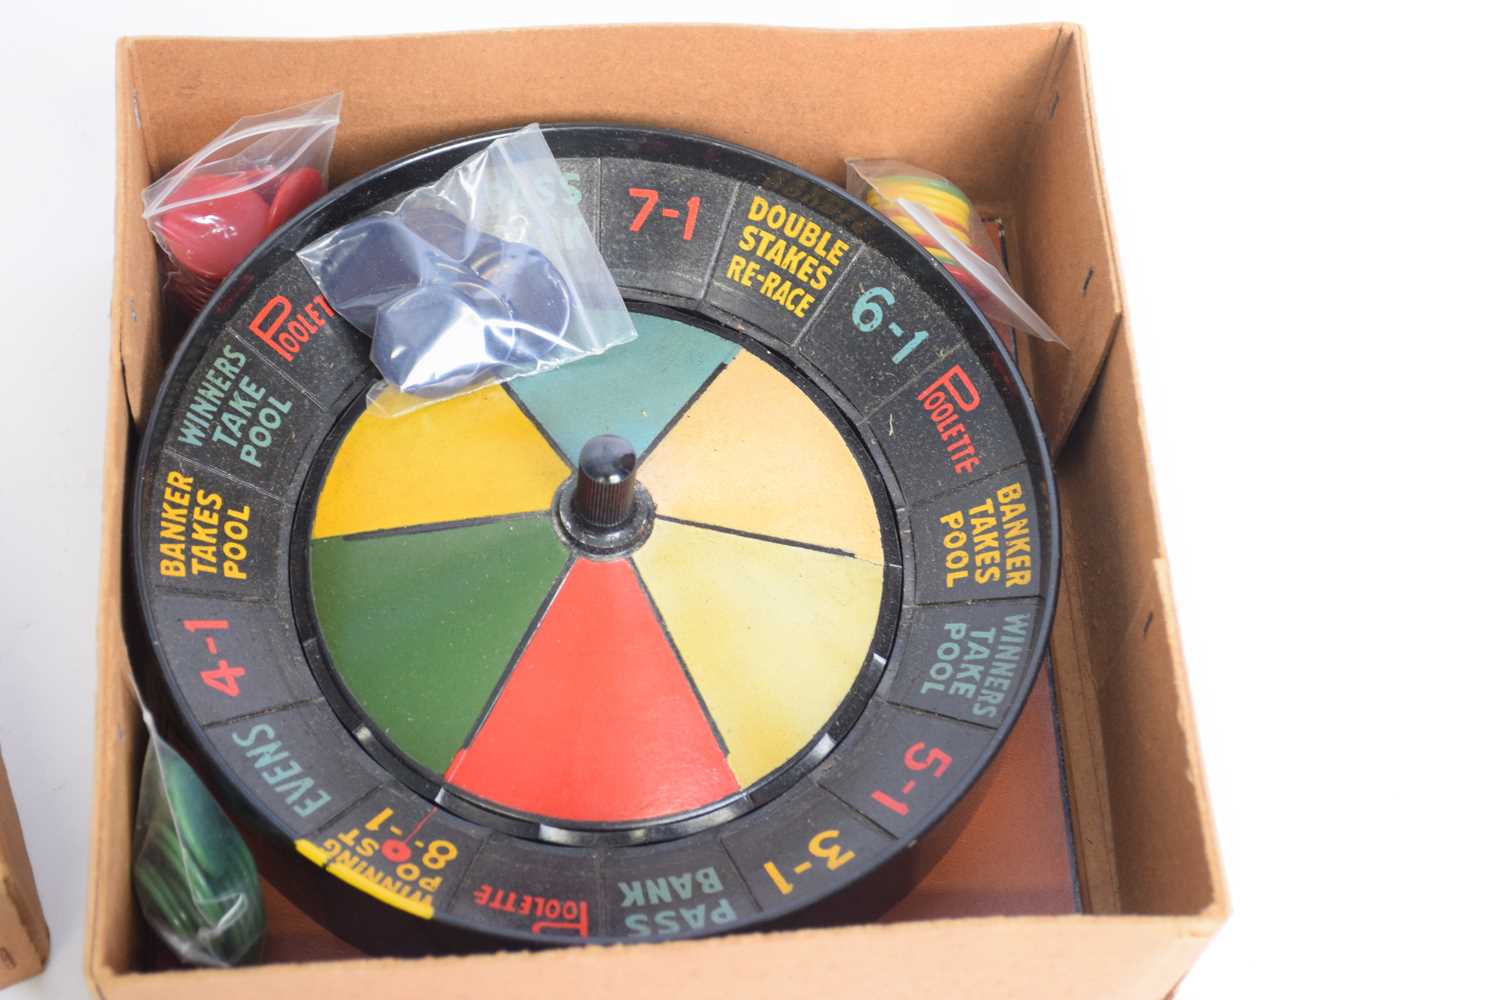 Boxed vintage roulette game - Image 2 of 2